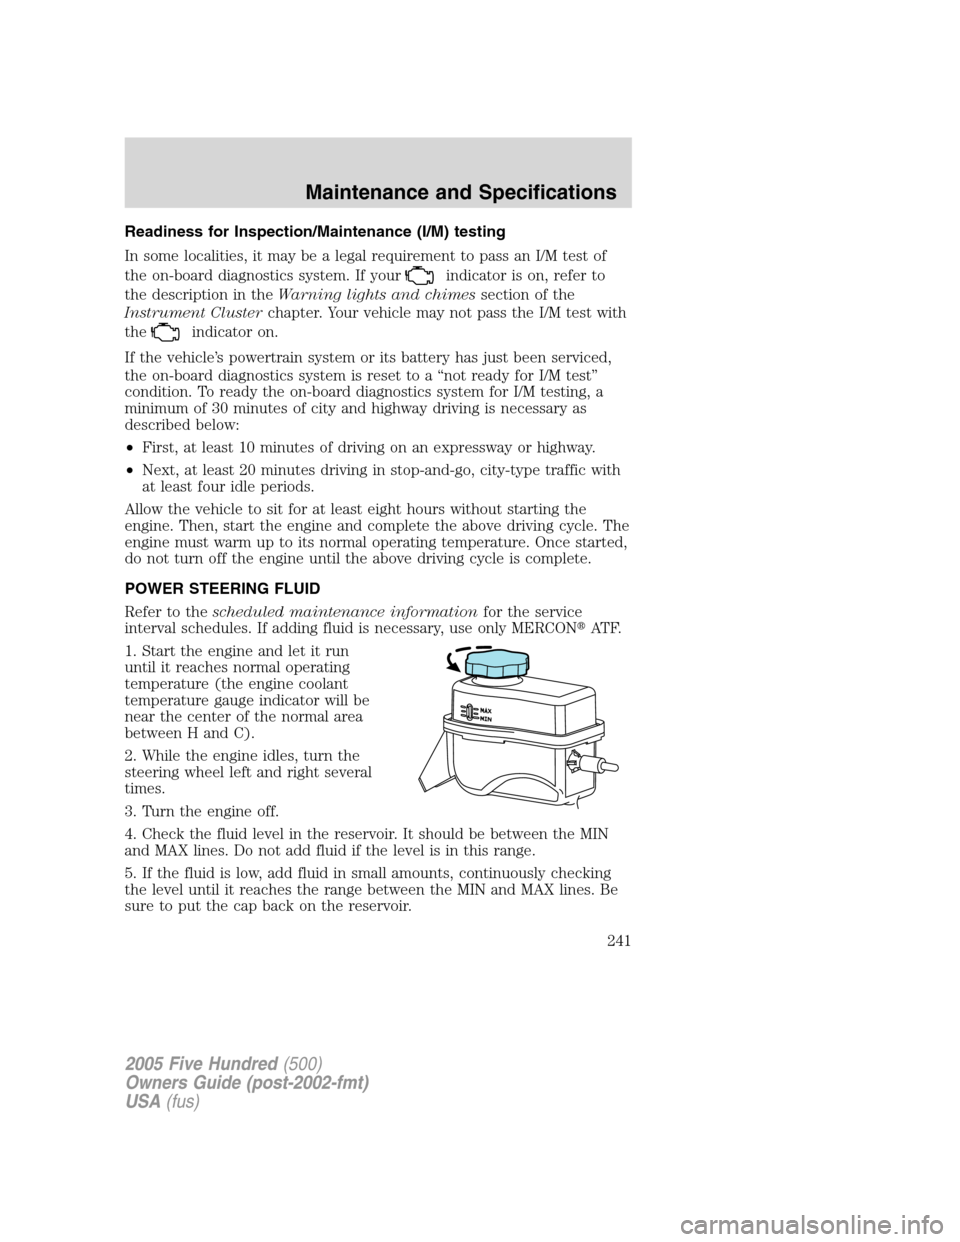 FORD FIVE HUNDRED 2005 D258 / 1.G Owners Manual Readiness for Inspection/Maintenance (I/M) testing
In some localities, it may be a legal requirement to pass an I/M test of
the on-board diagnostics system. If your
indicator is on, refer to
the descr